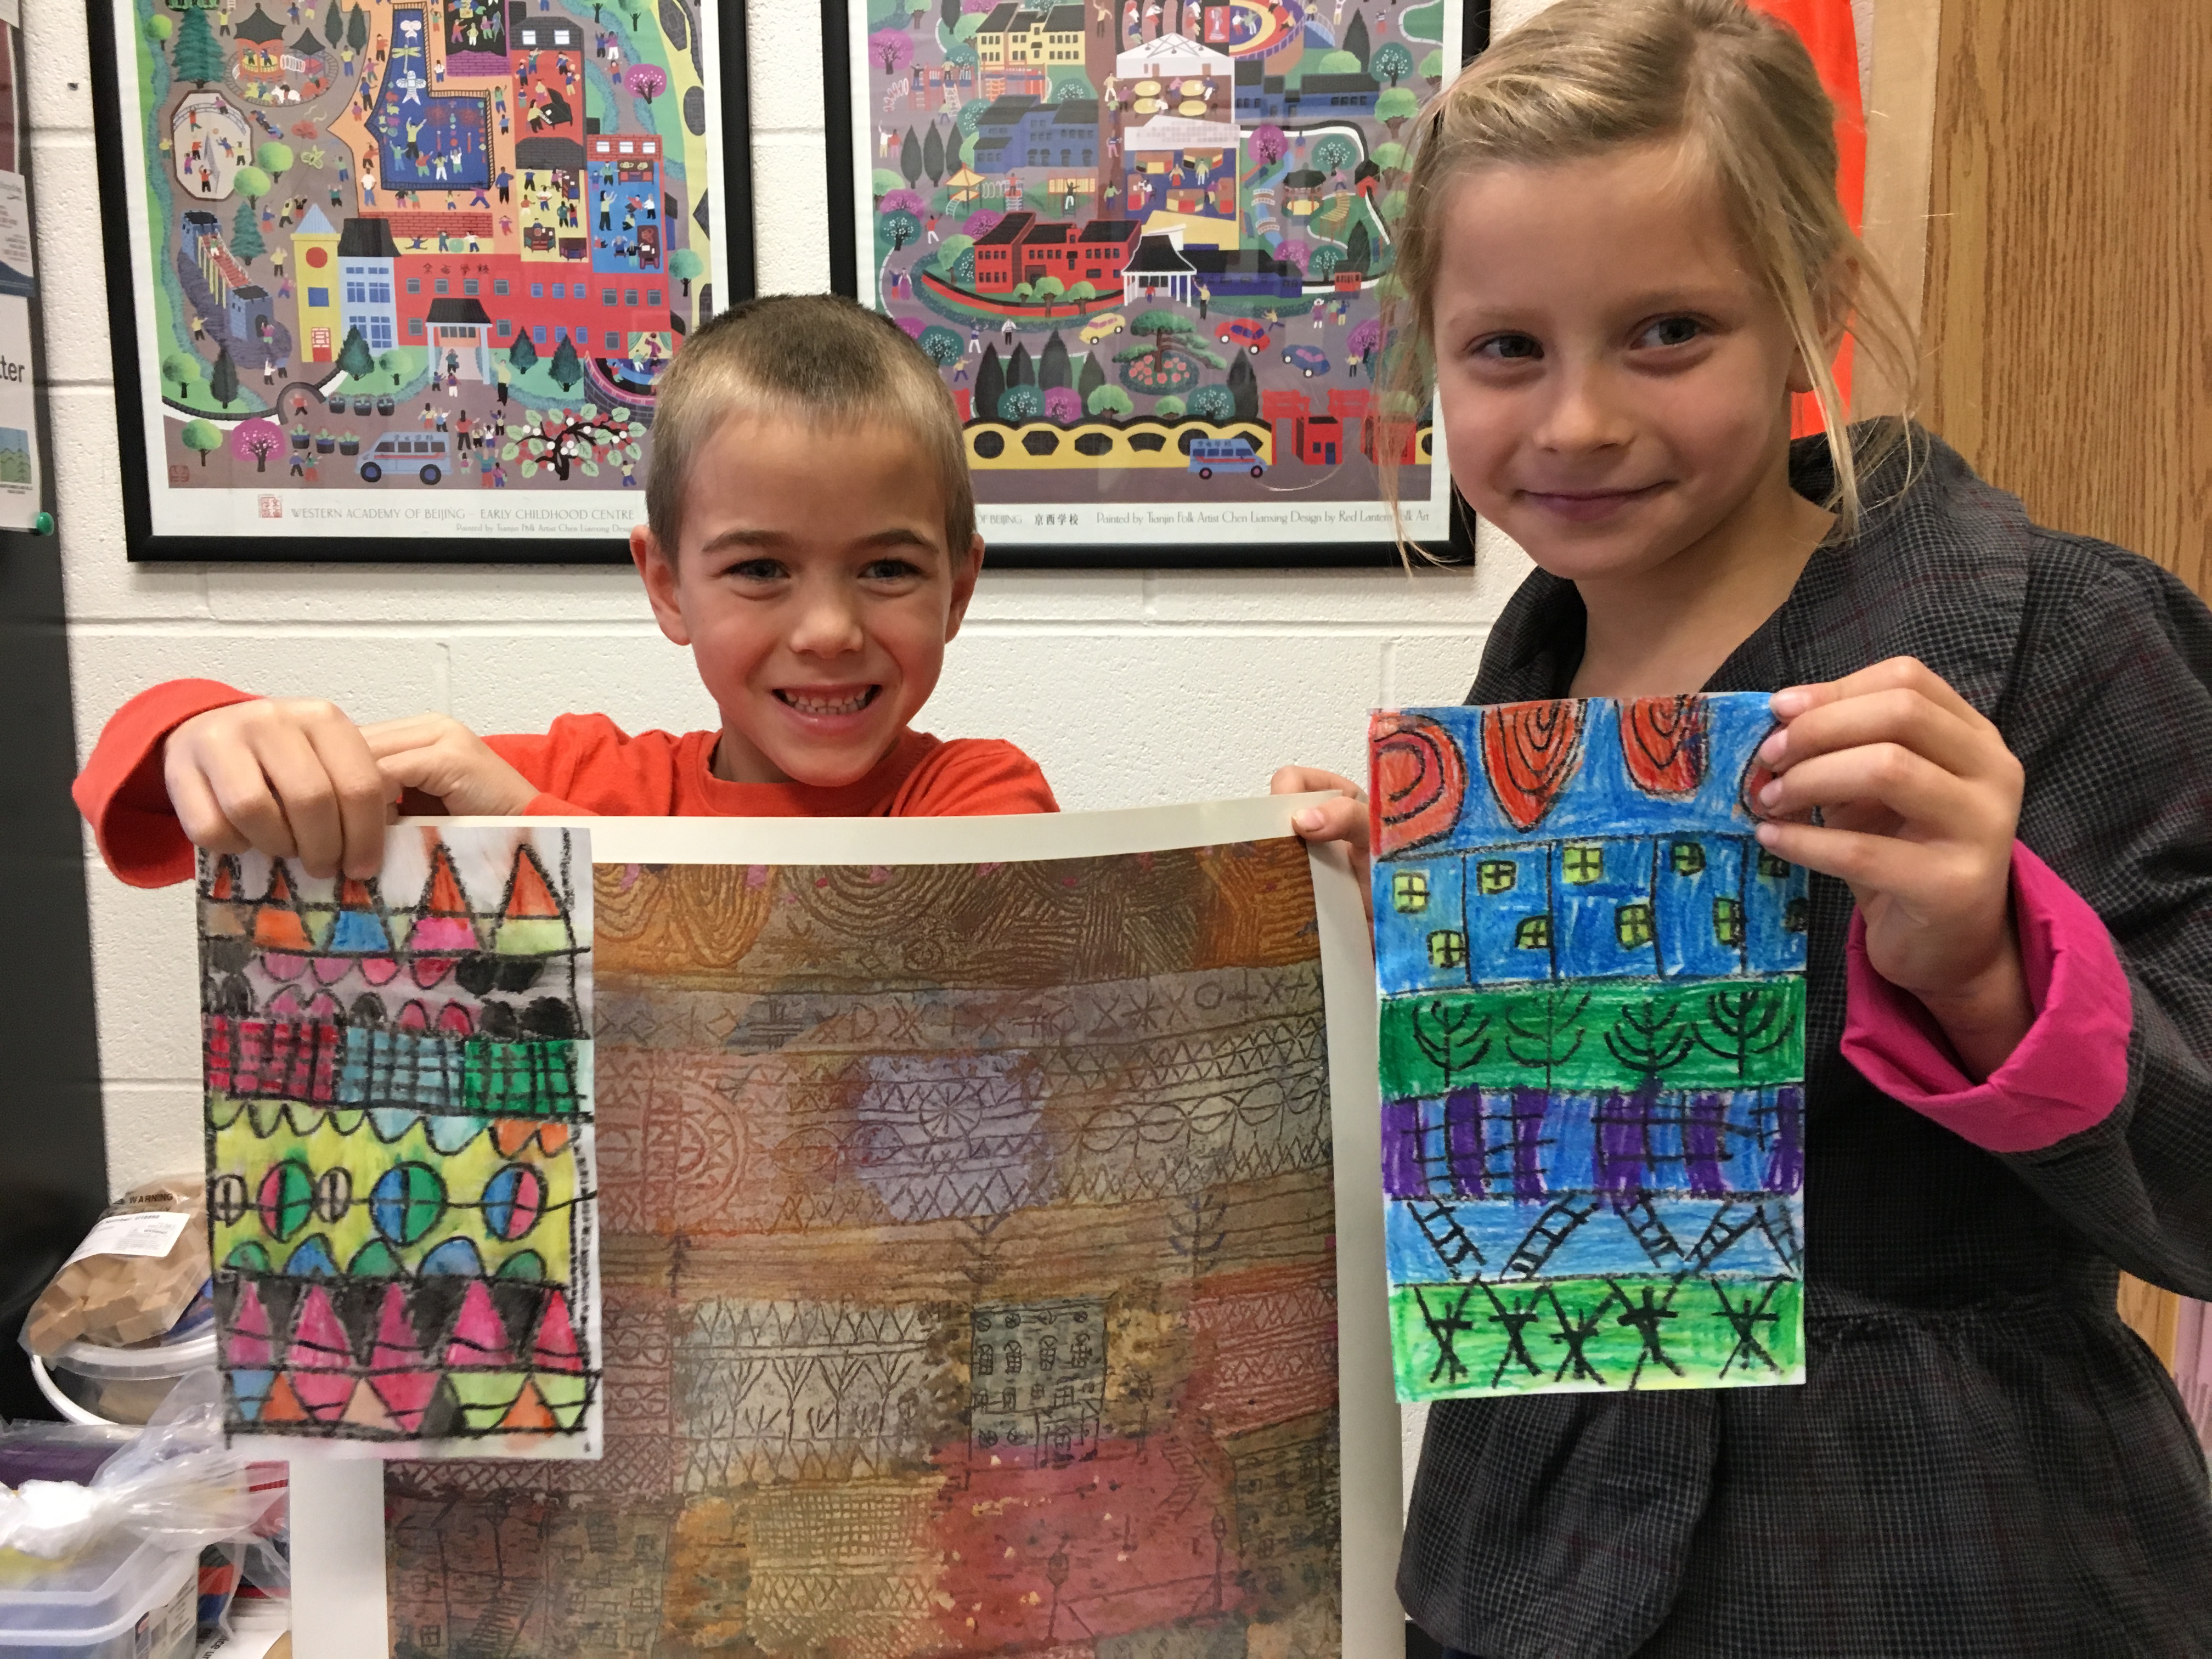 Students showing their artwork